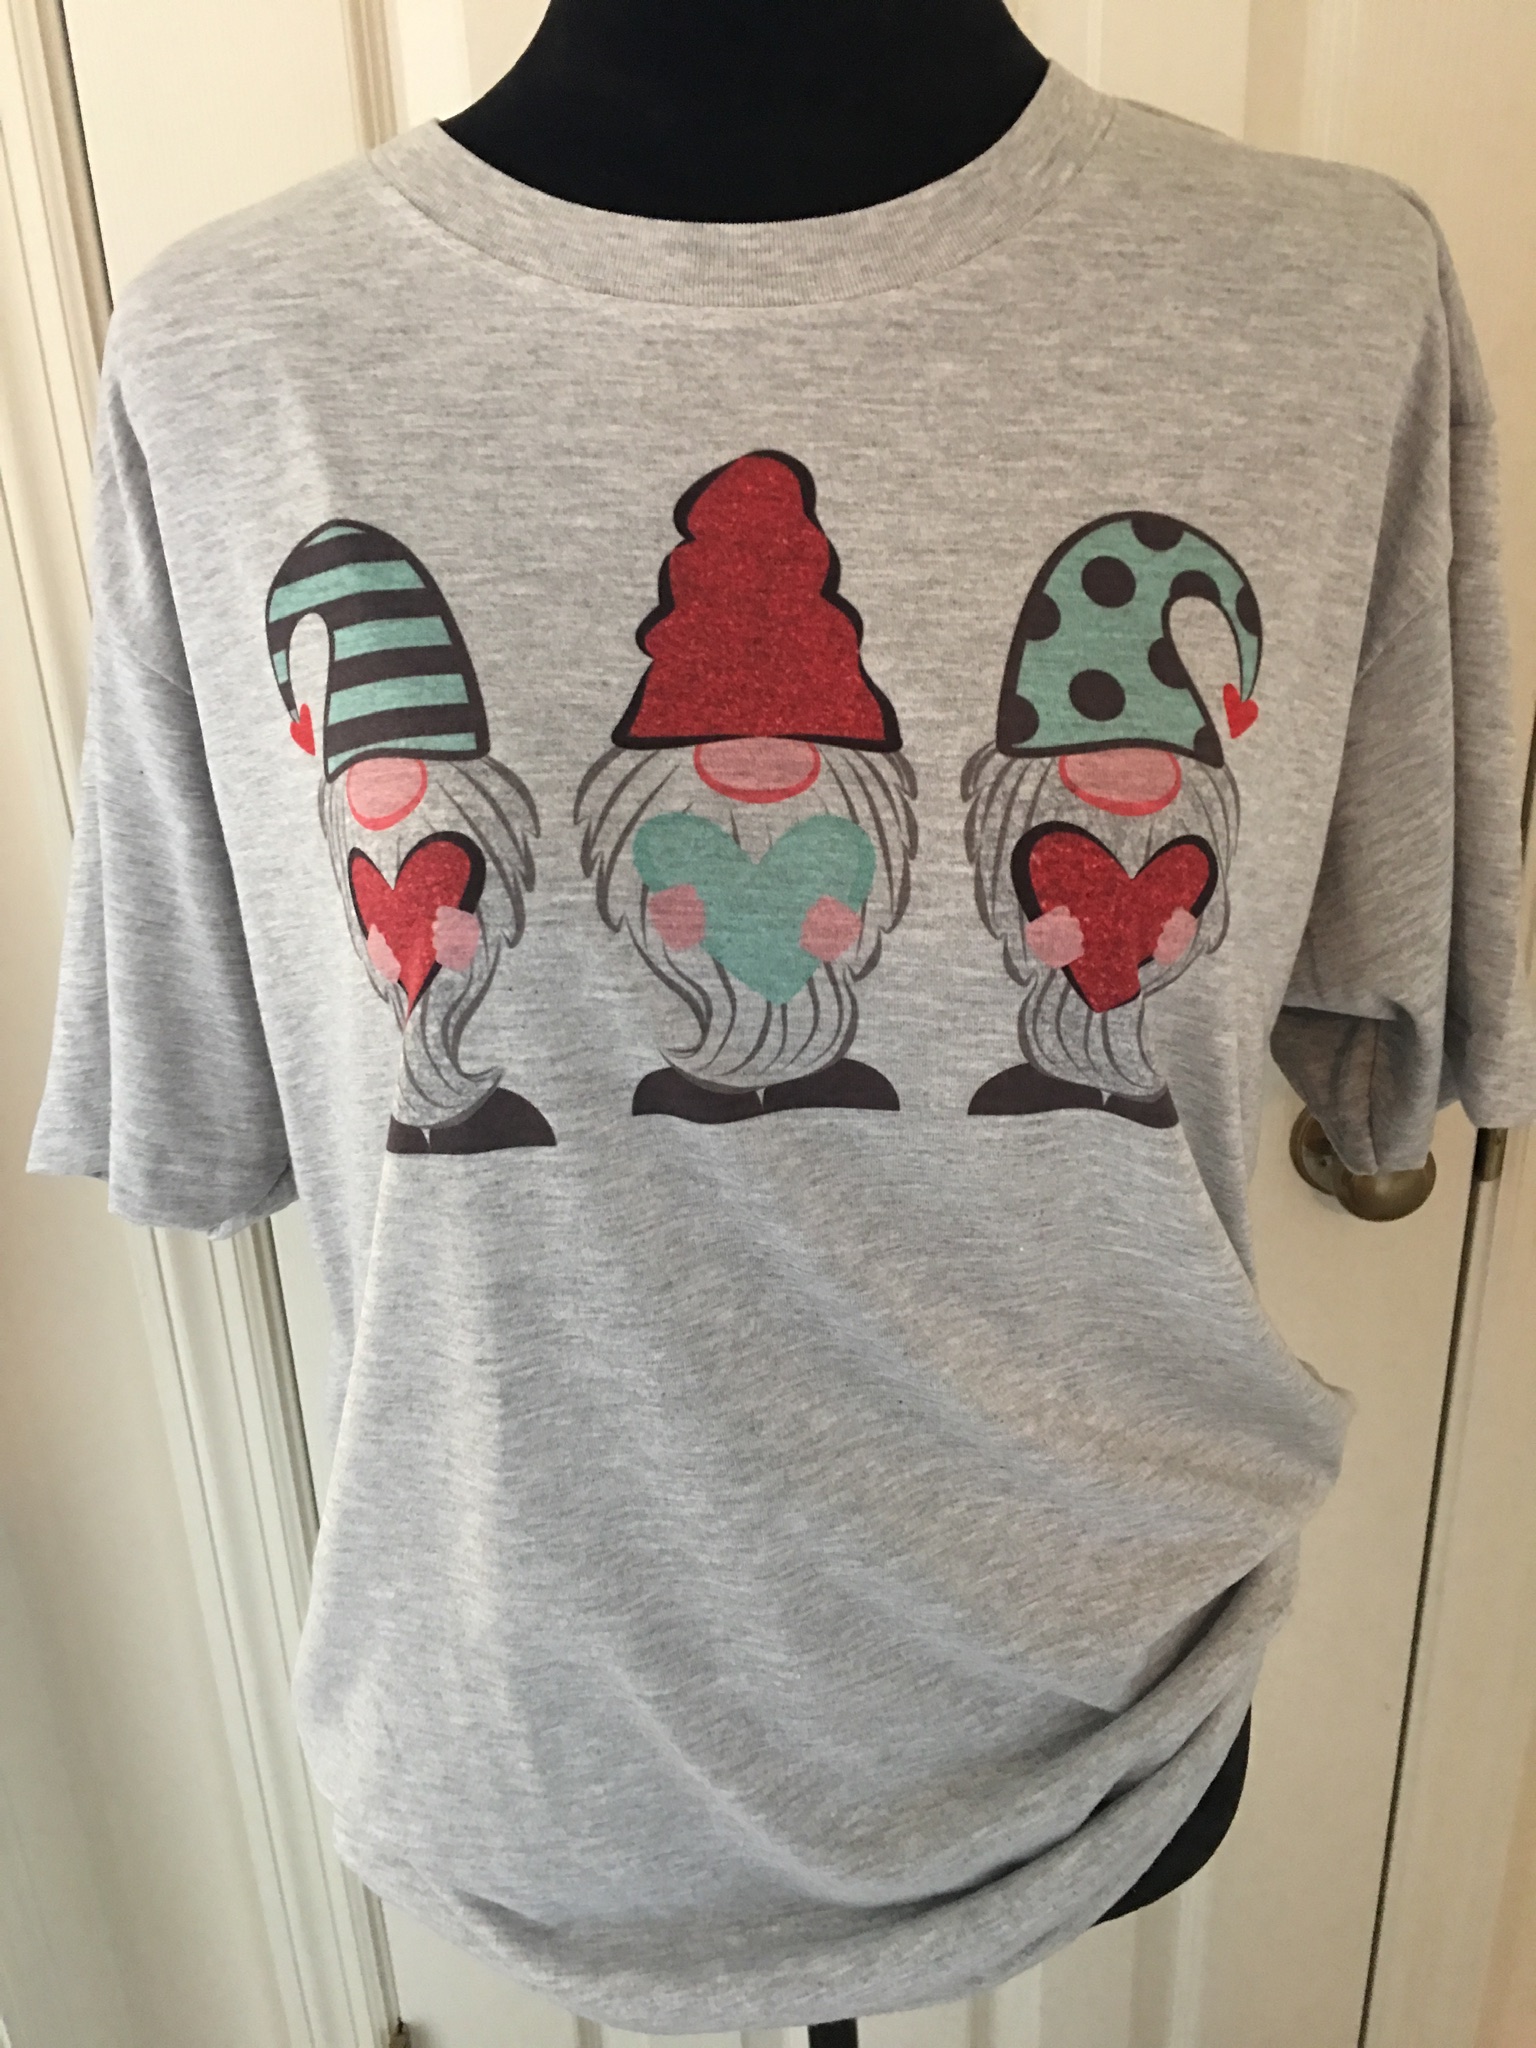 Gnome Tee Shirt made with sublimation printing